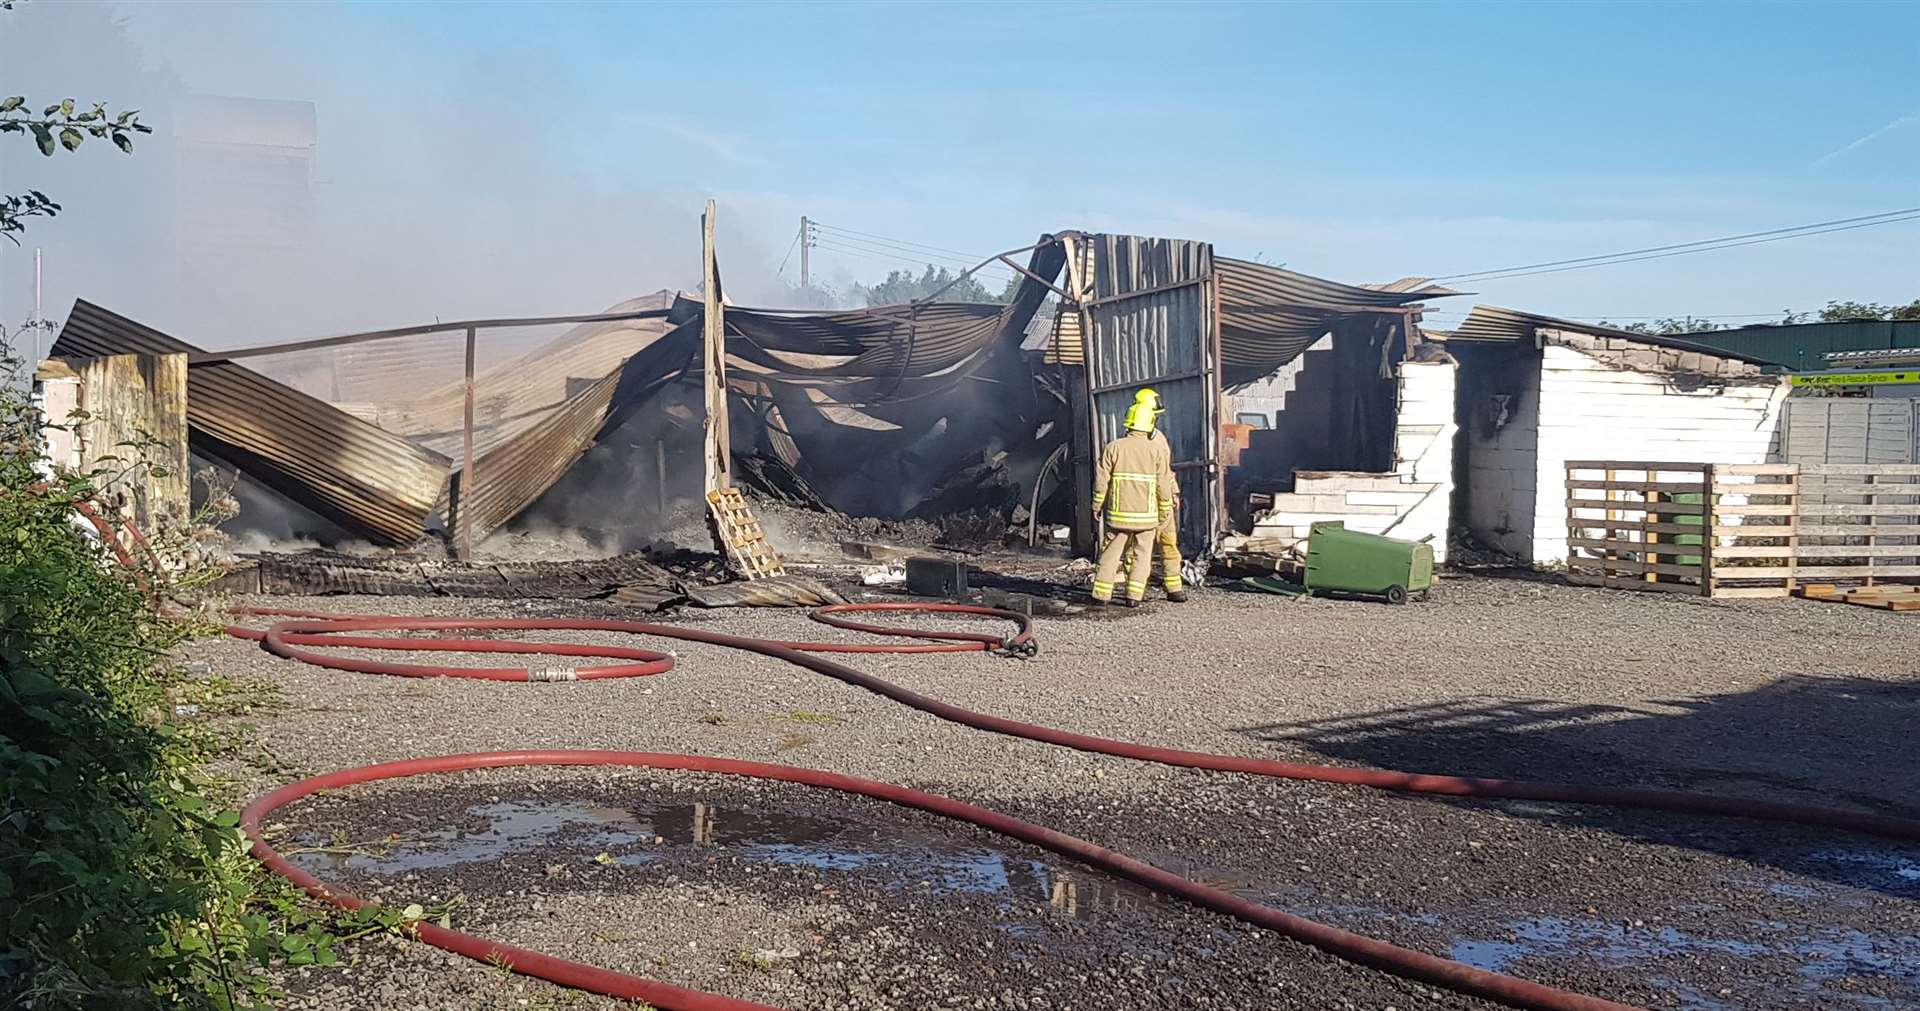 The fire has destroyed the Kingswood workshop